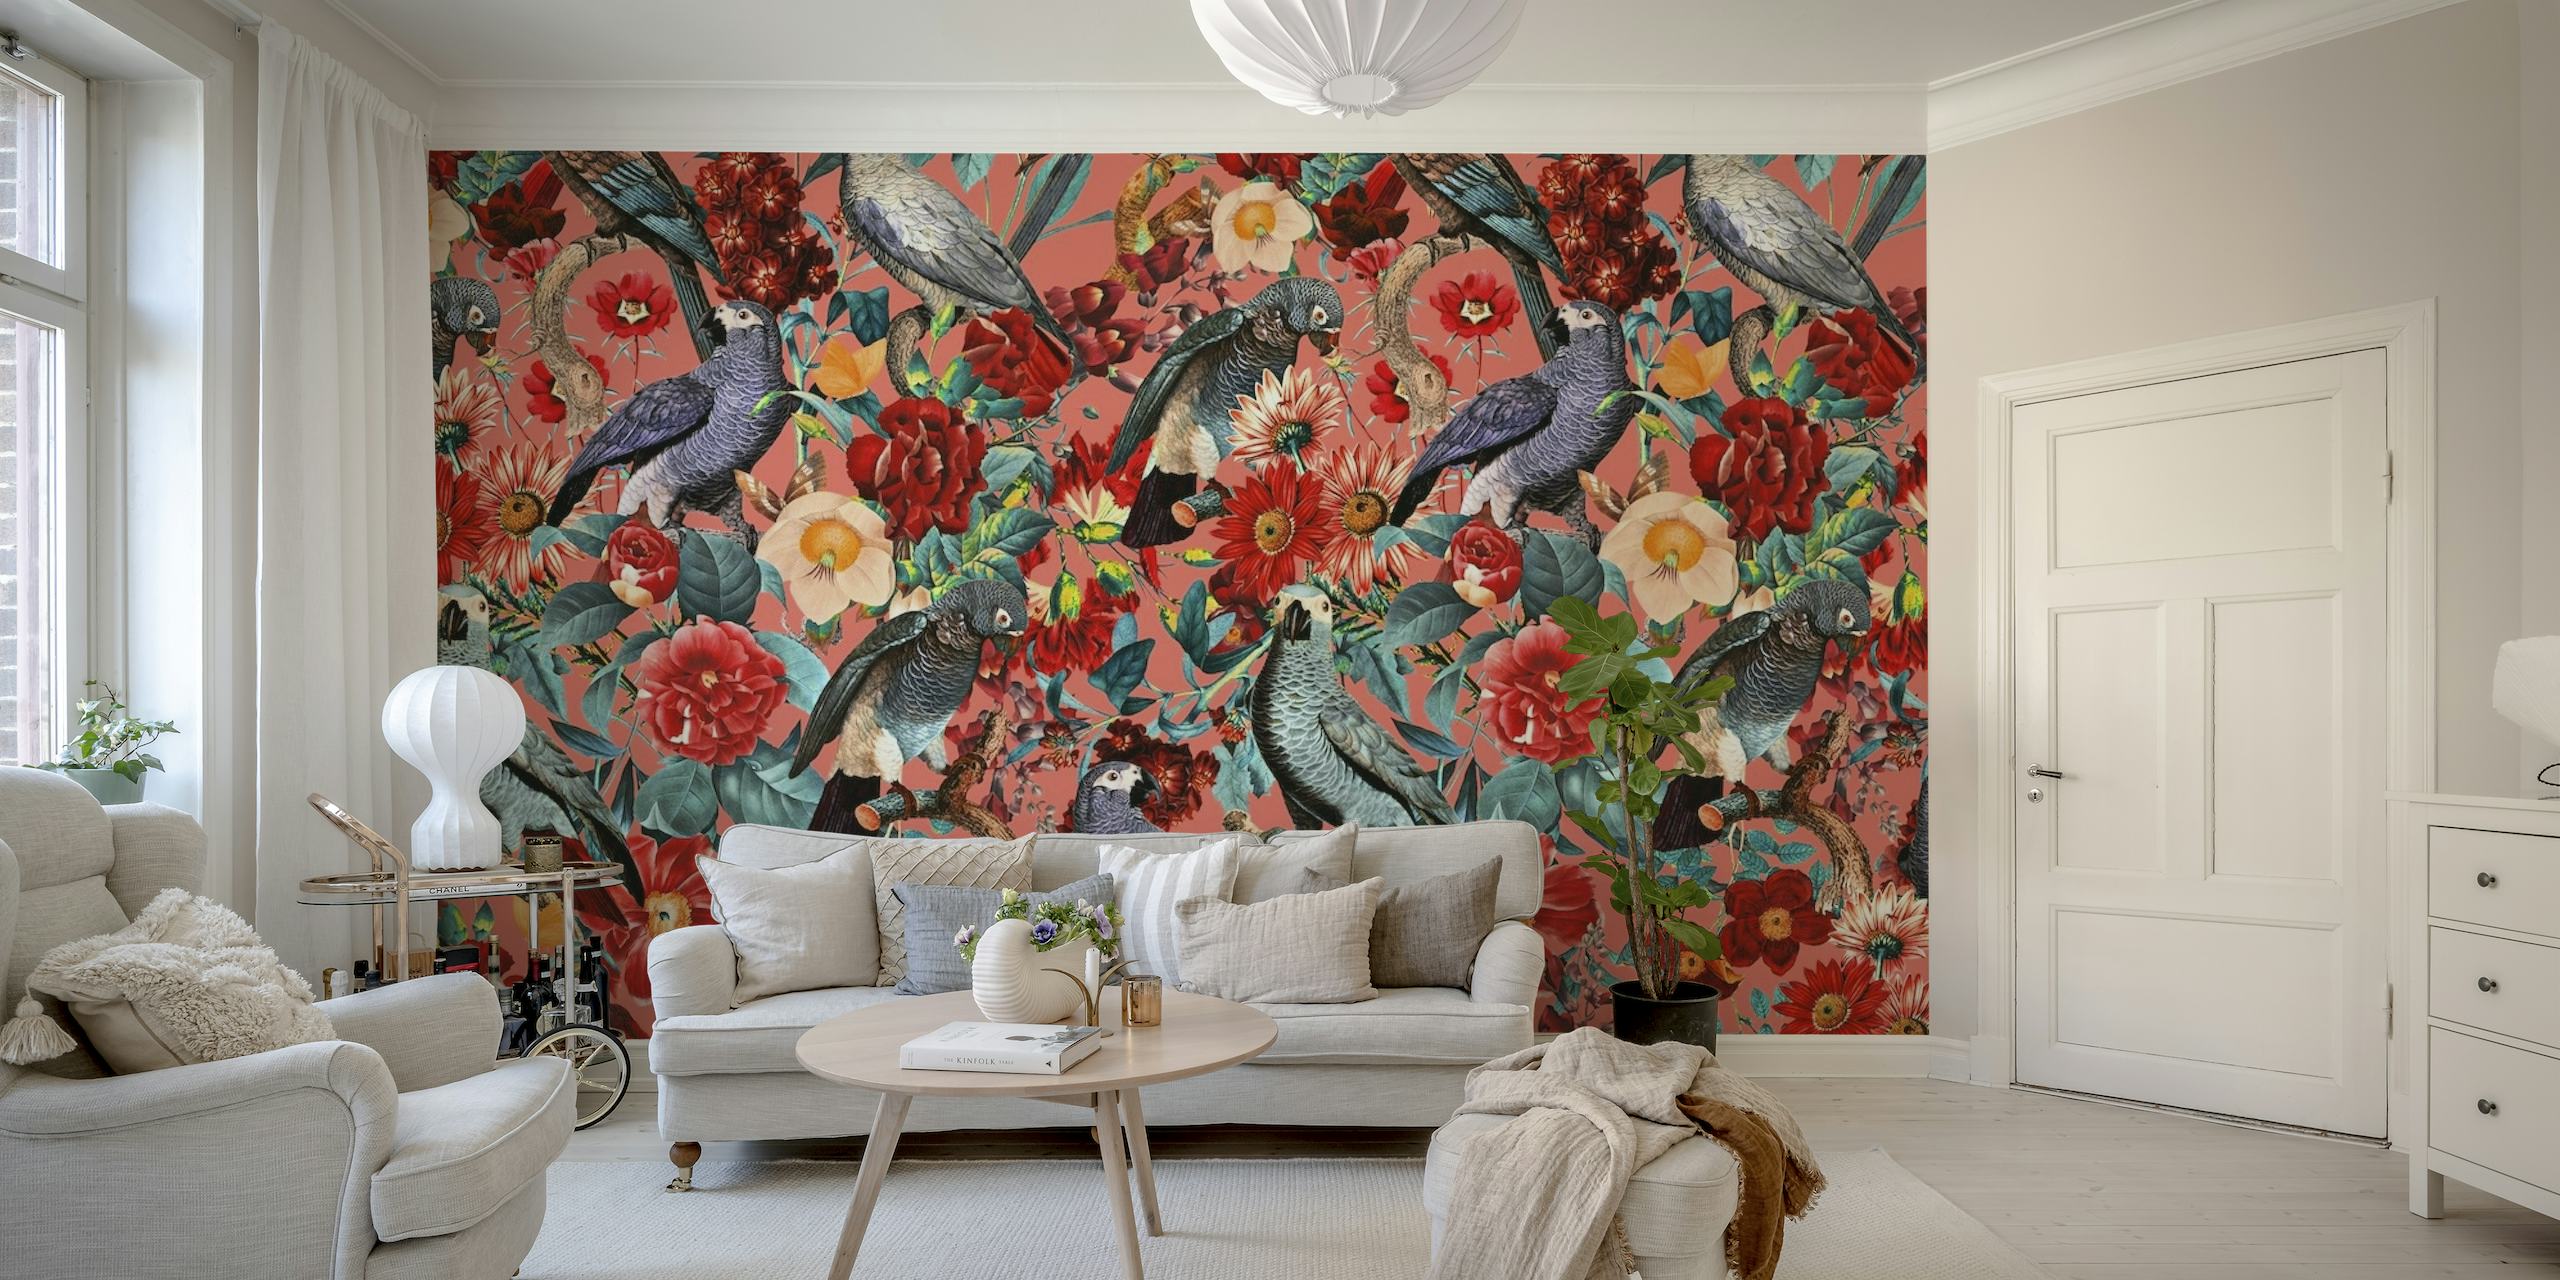 Vibrant floral and bird wall mural with a mix of colors and species in a lively design